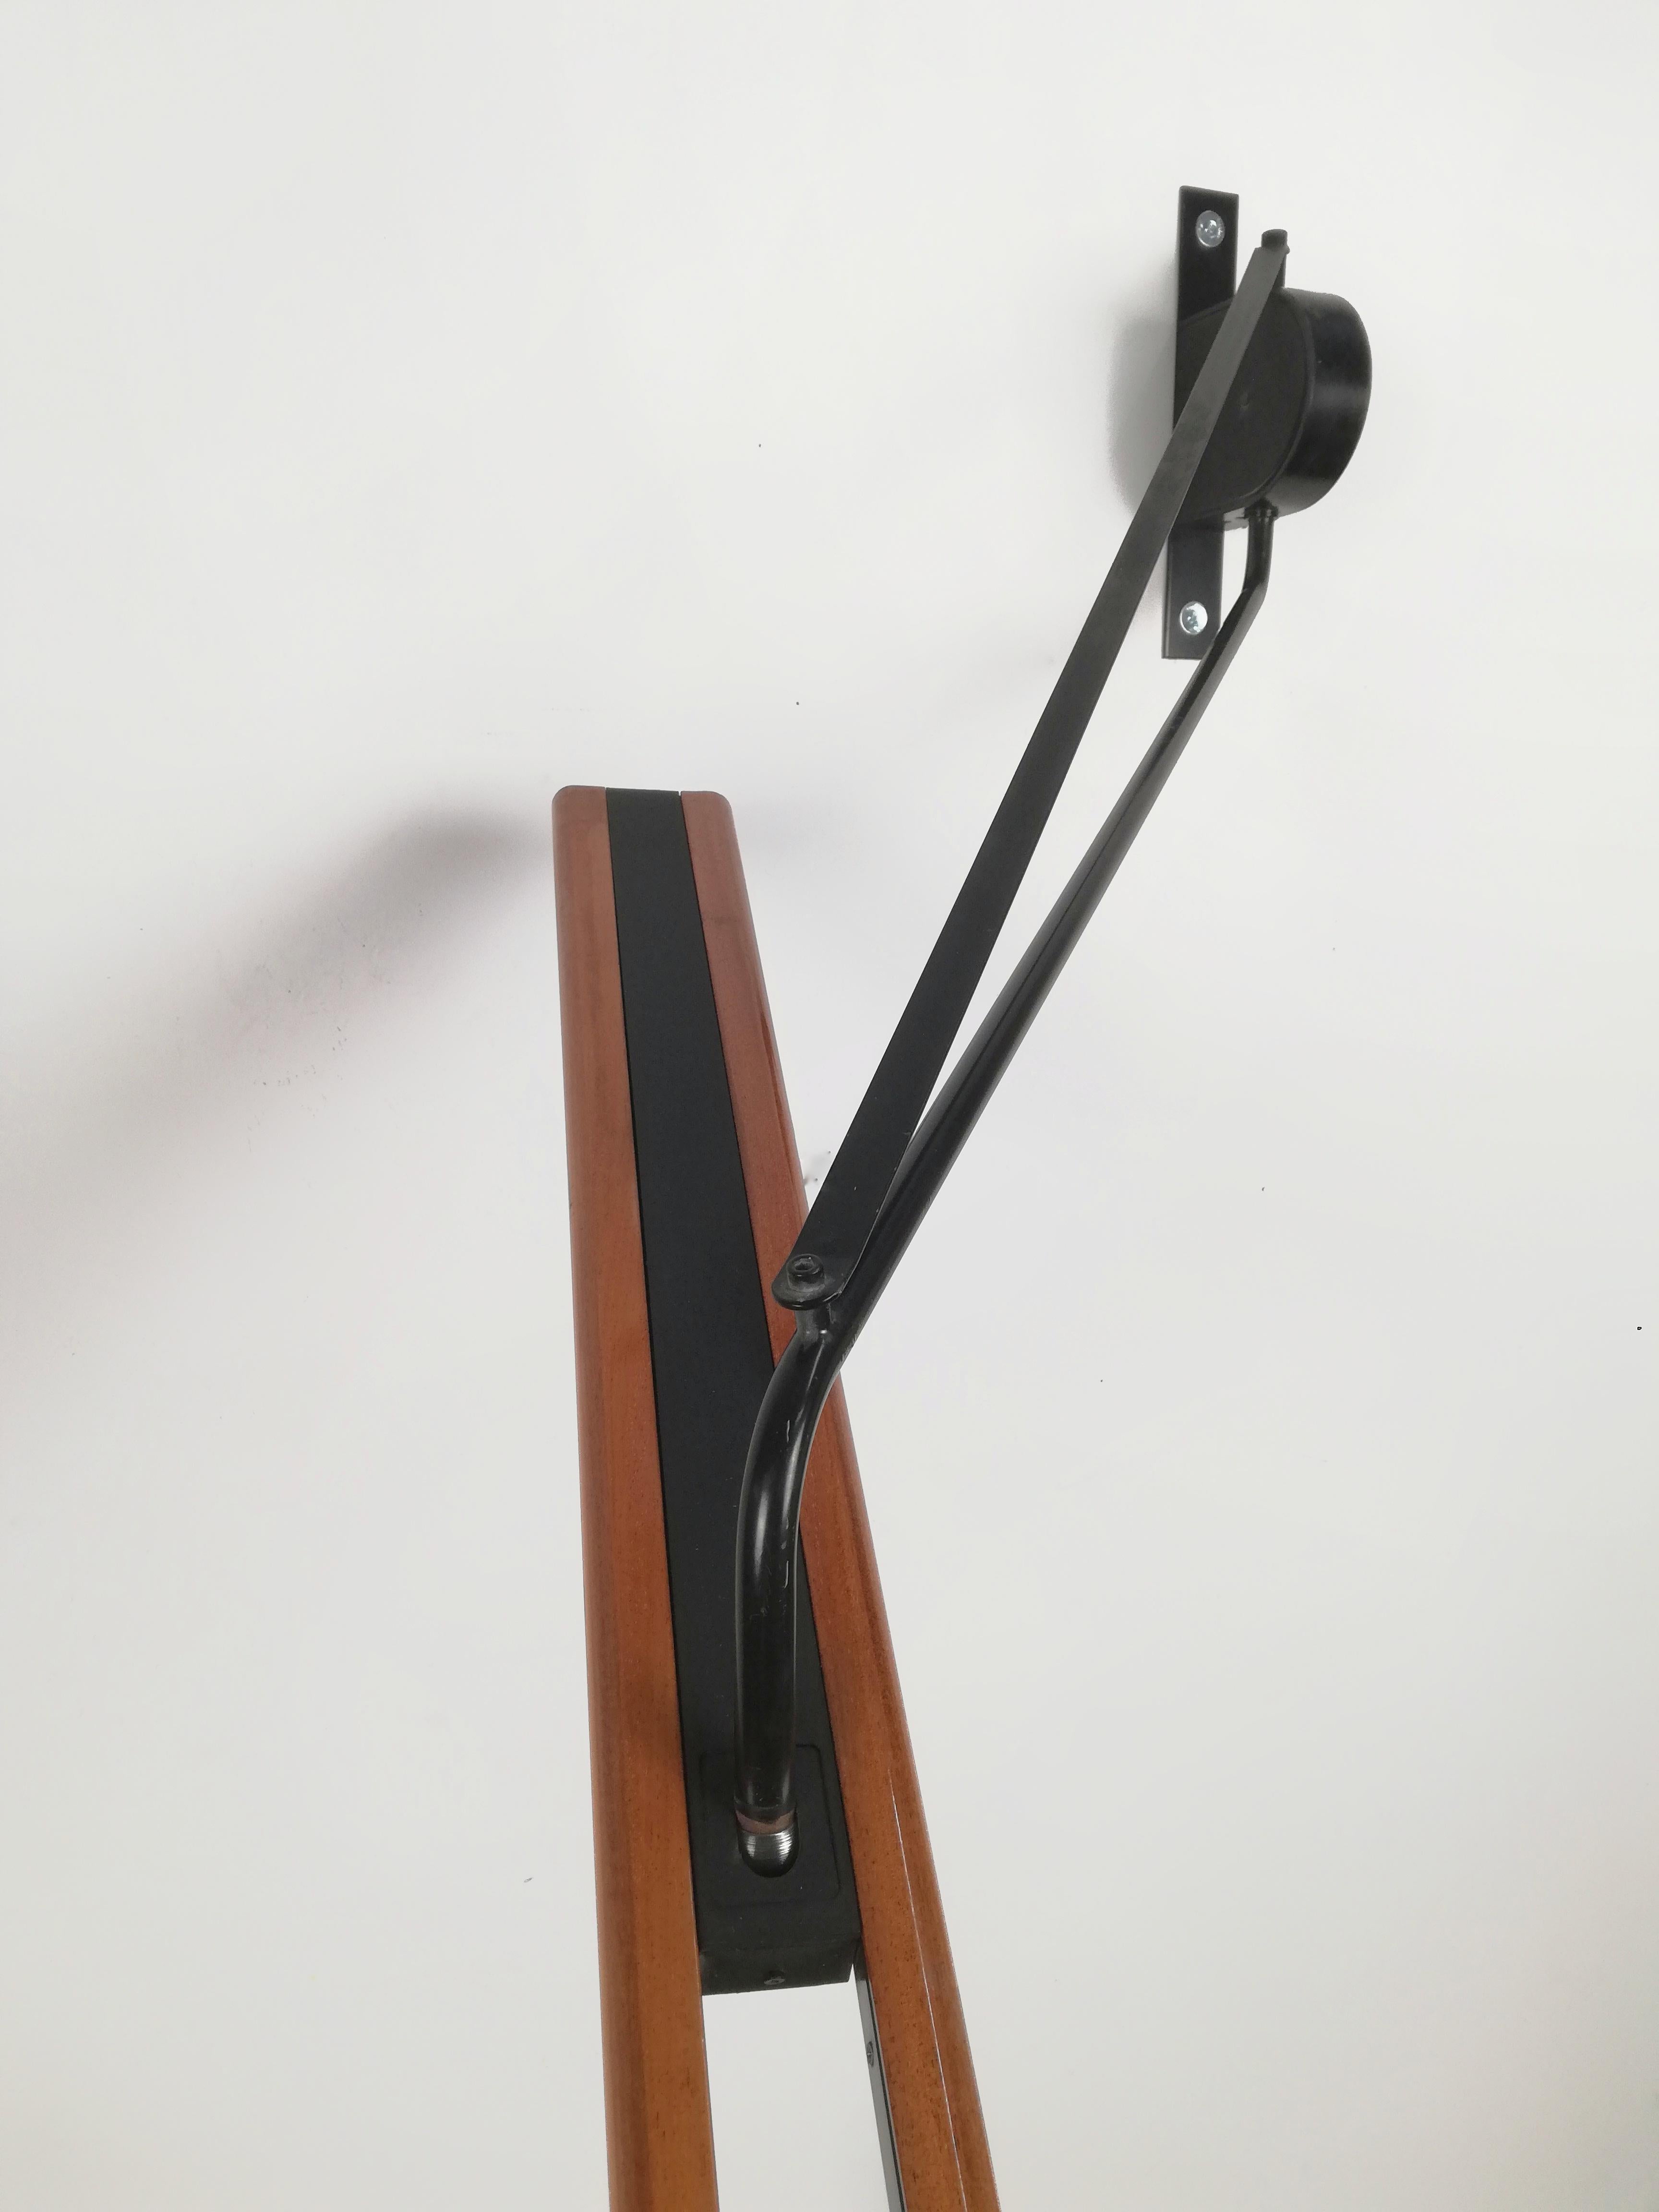 Halley Wall Lamp with Adjustable Arm in Layered Wood by Paf Studio, Italy, 1980s For Sale 1